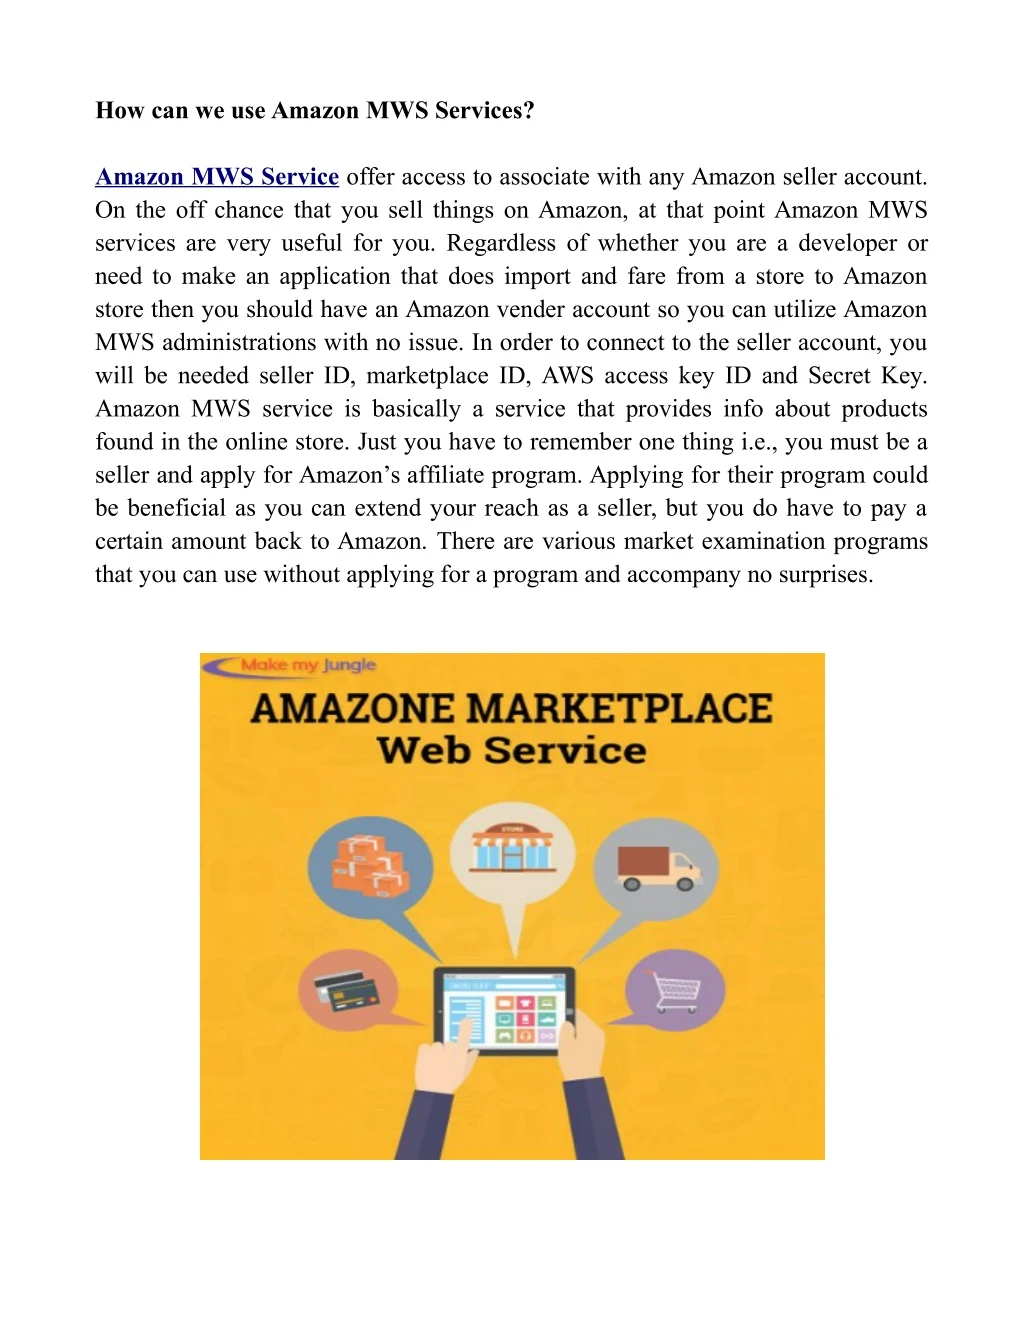 how can we use amazon mws services